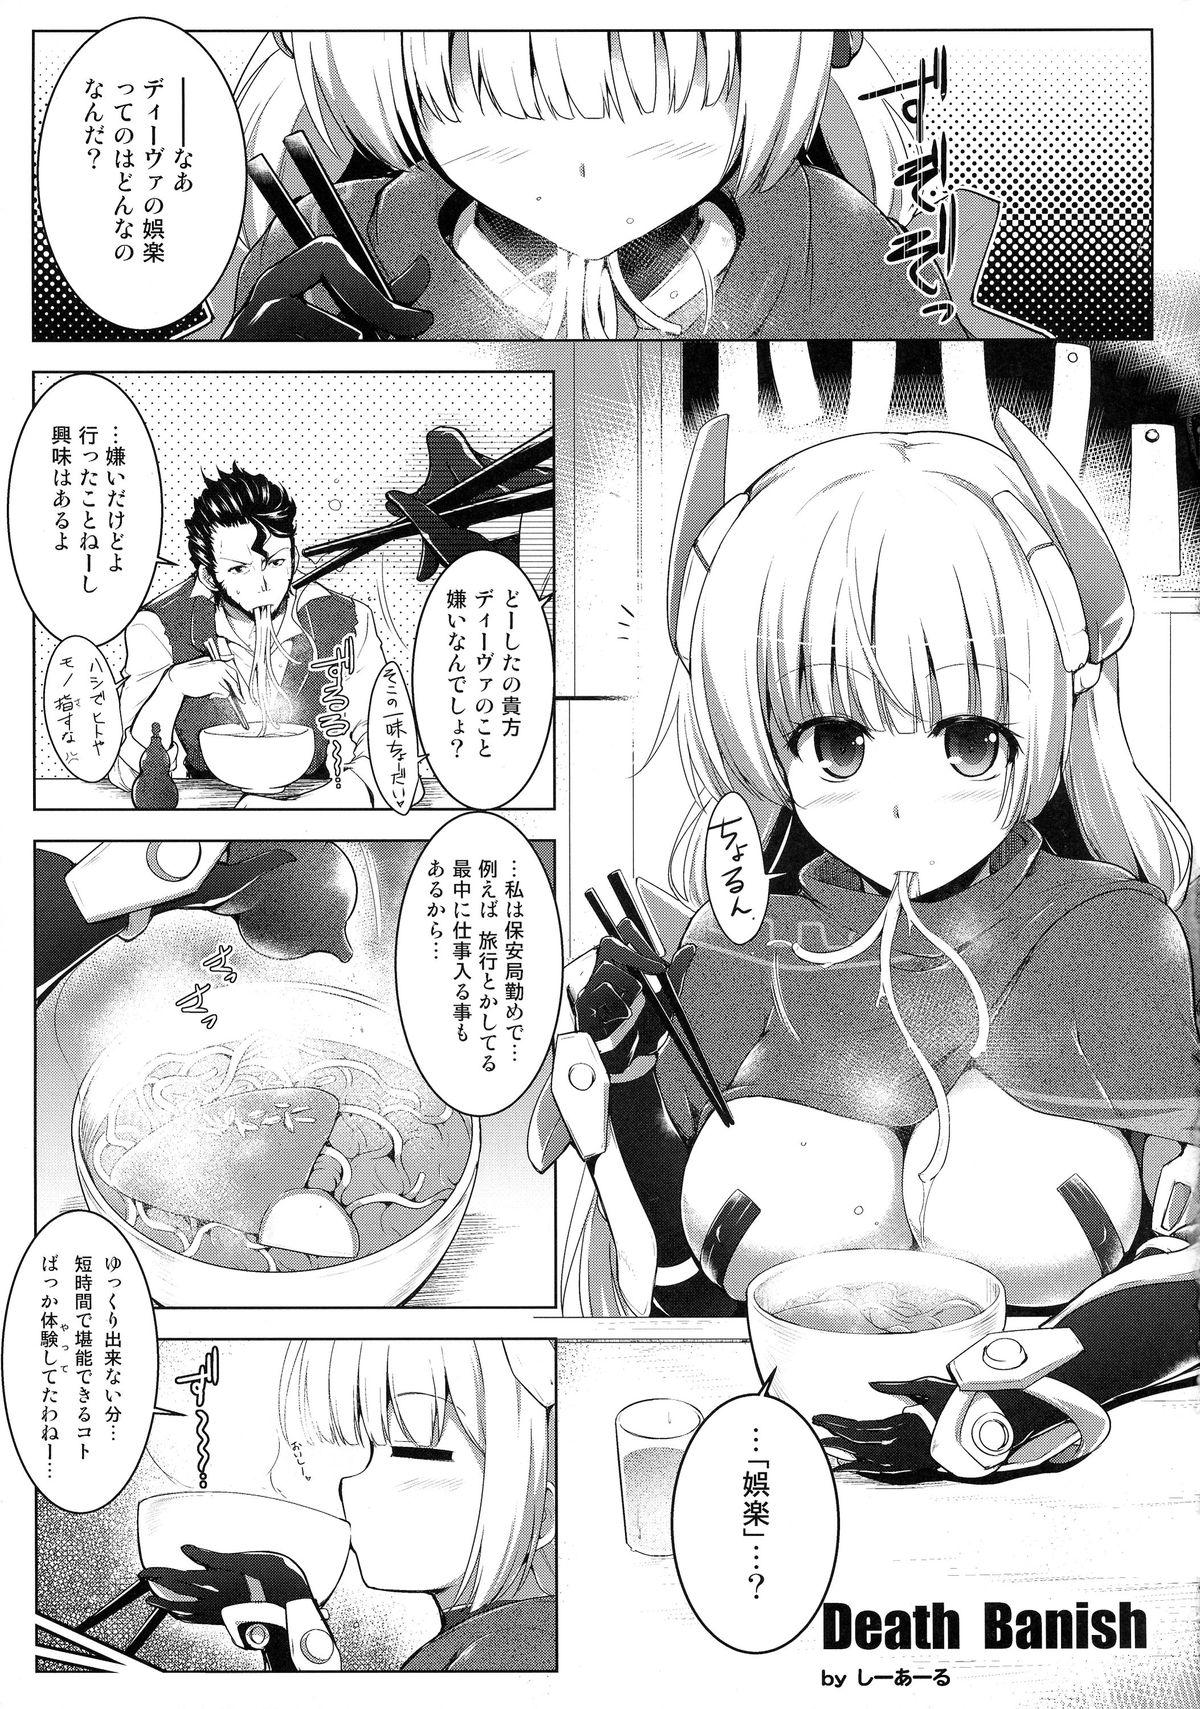 Girl Sucking Dick K.231 - Expelled from paradise Free Rough Porn - Page 5